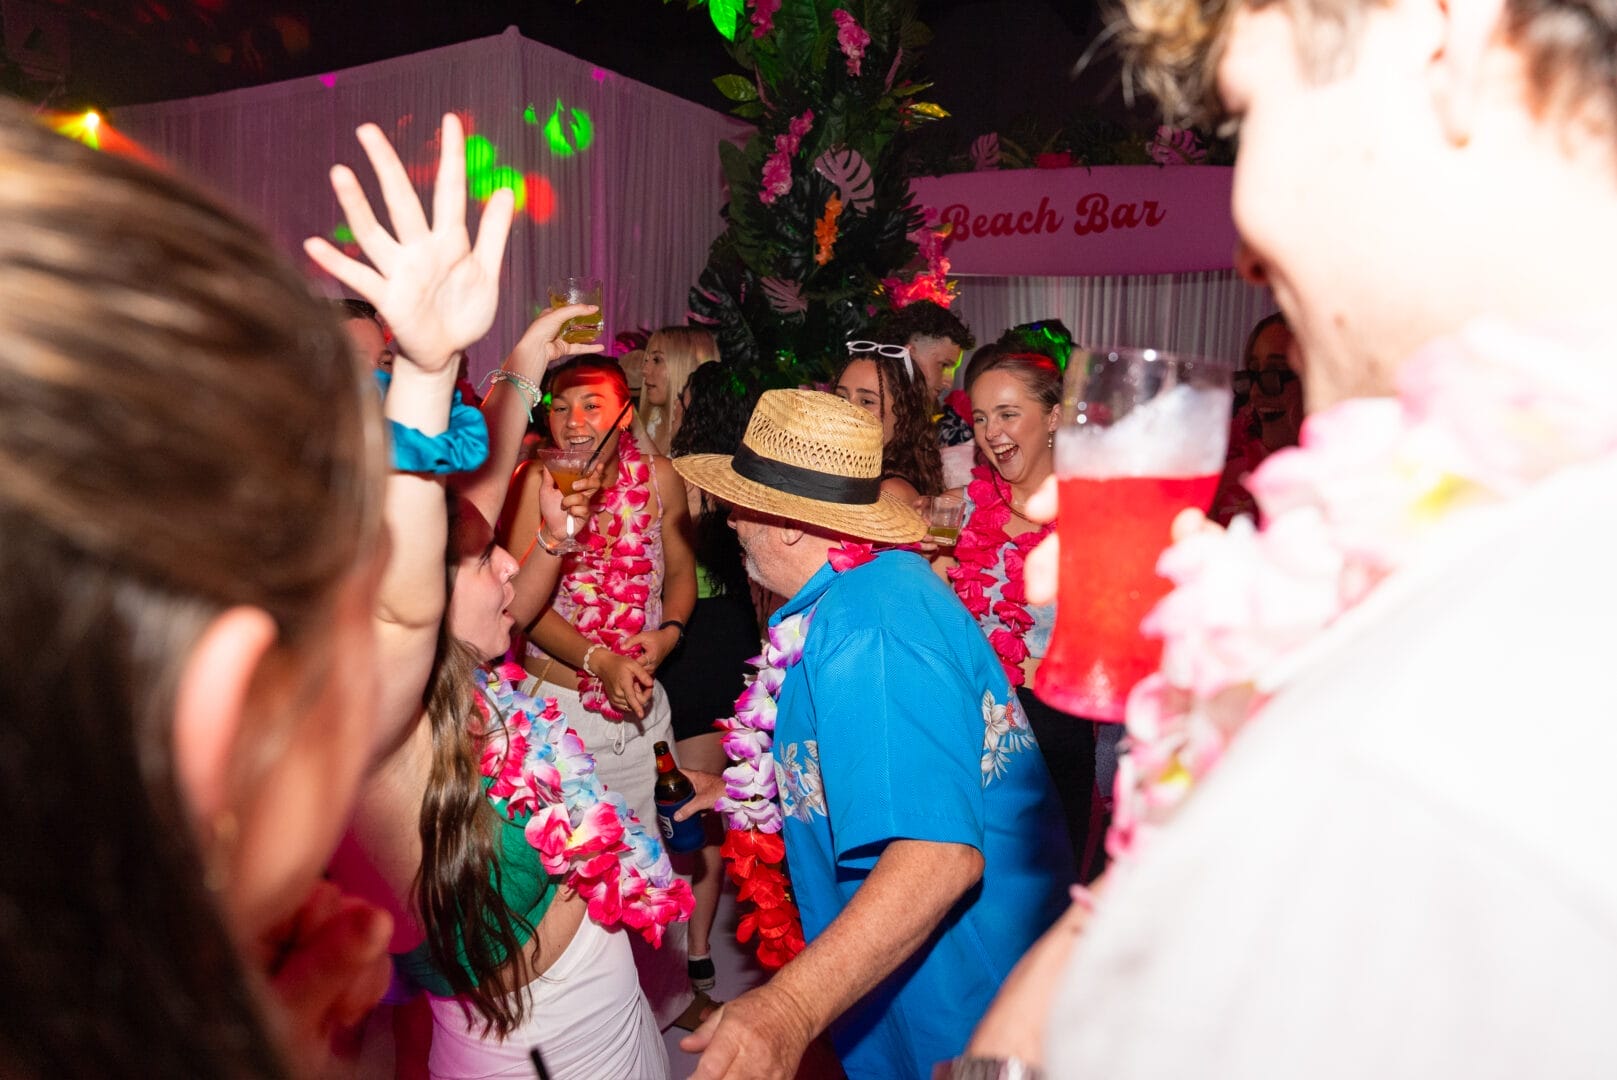 Taylor's Beach Club Themed 21st Birthday Party - Guests dancing on the dance floor